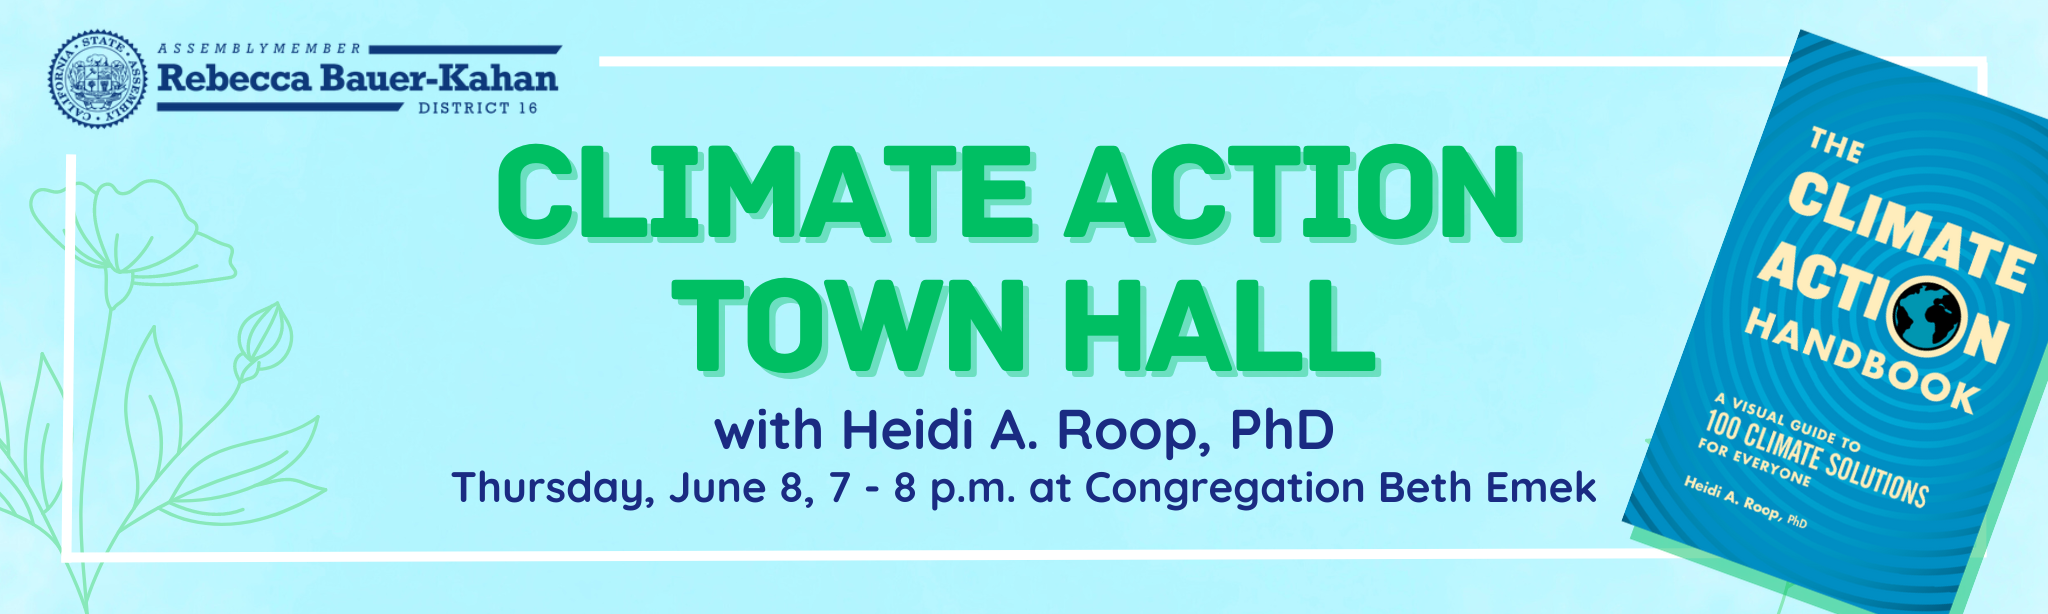 Climate Action Town Hall